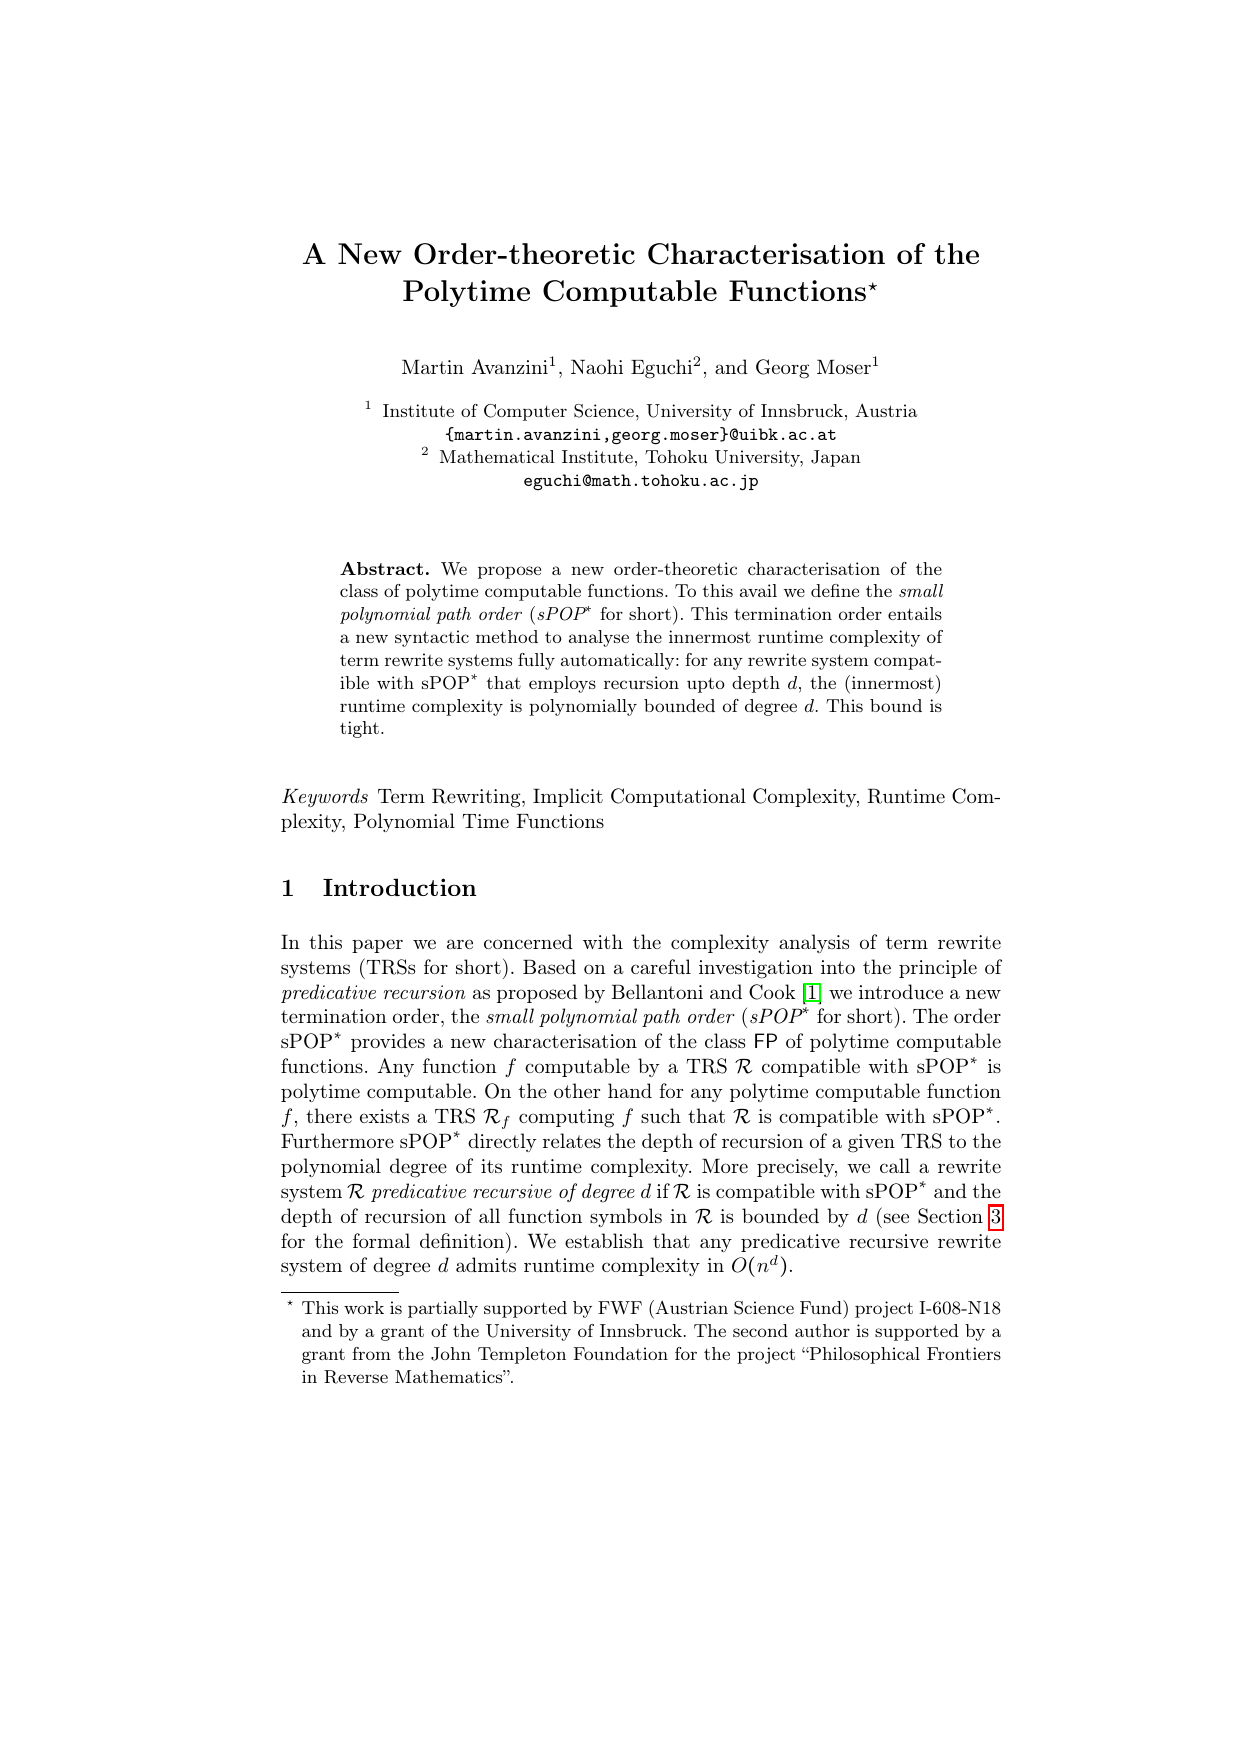 A New Order-theoretic Characterisation of the Polytime Computable Functions